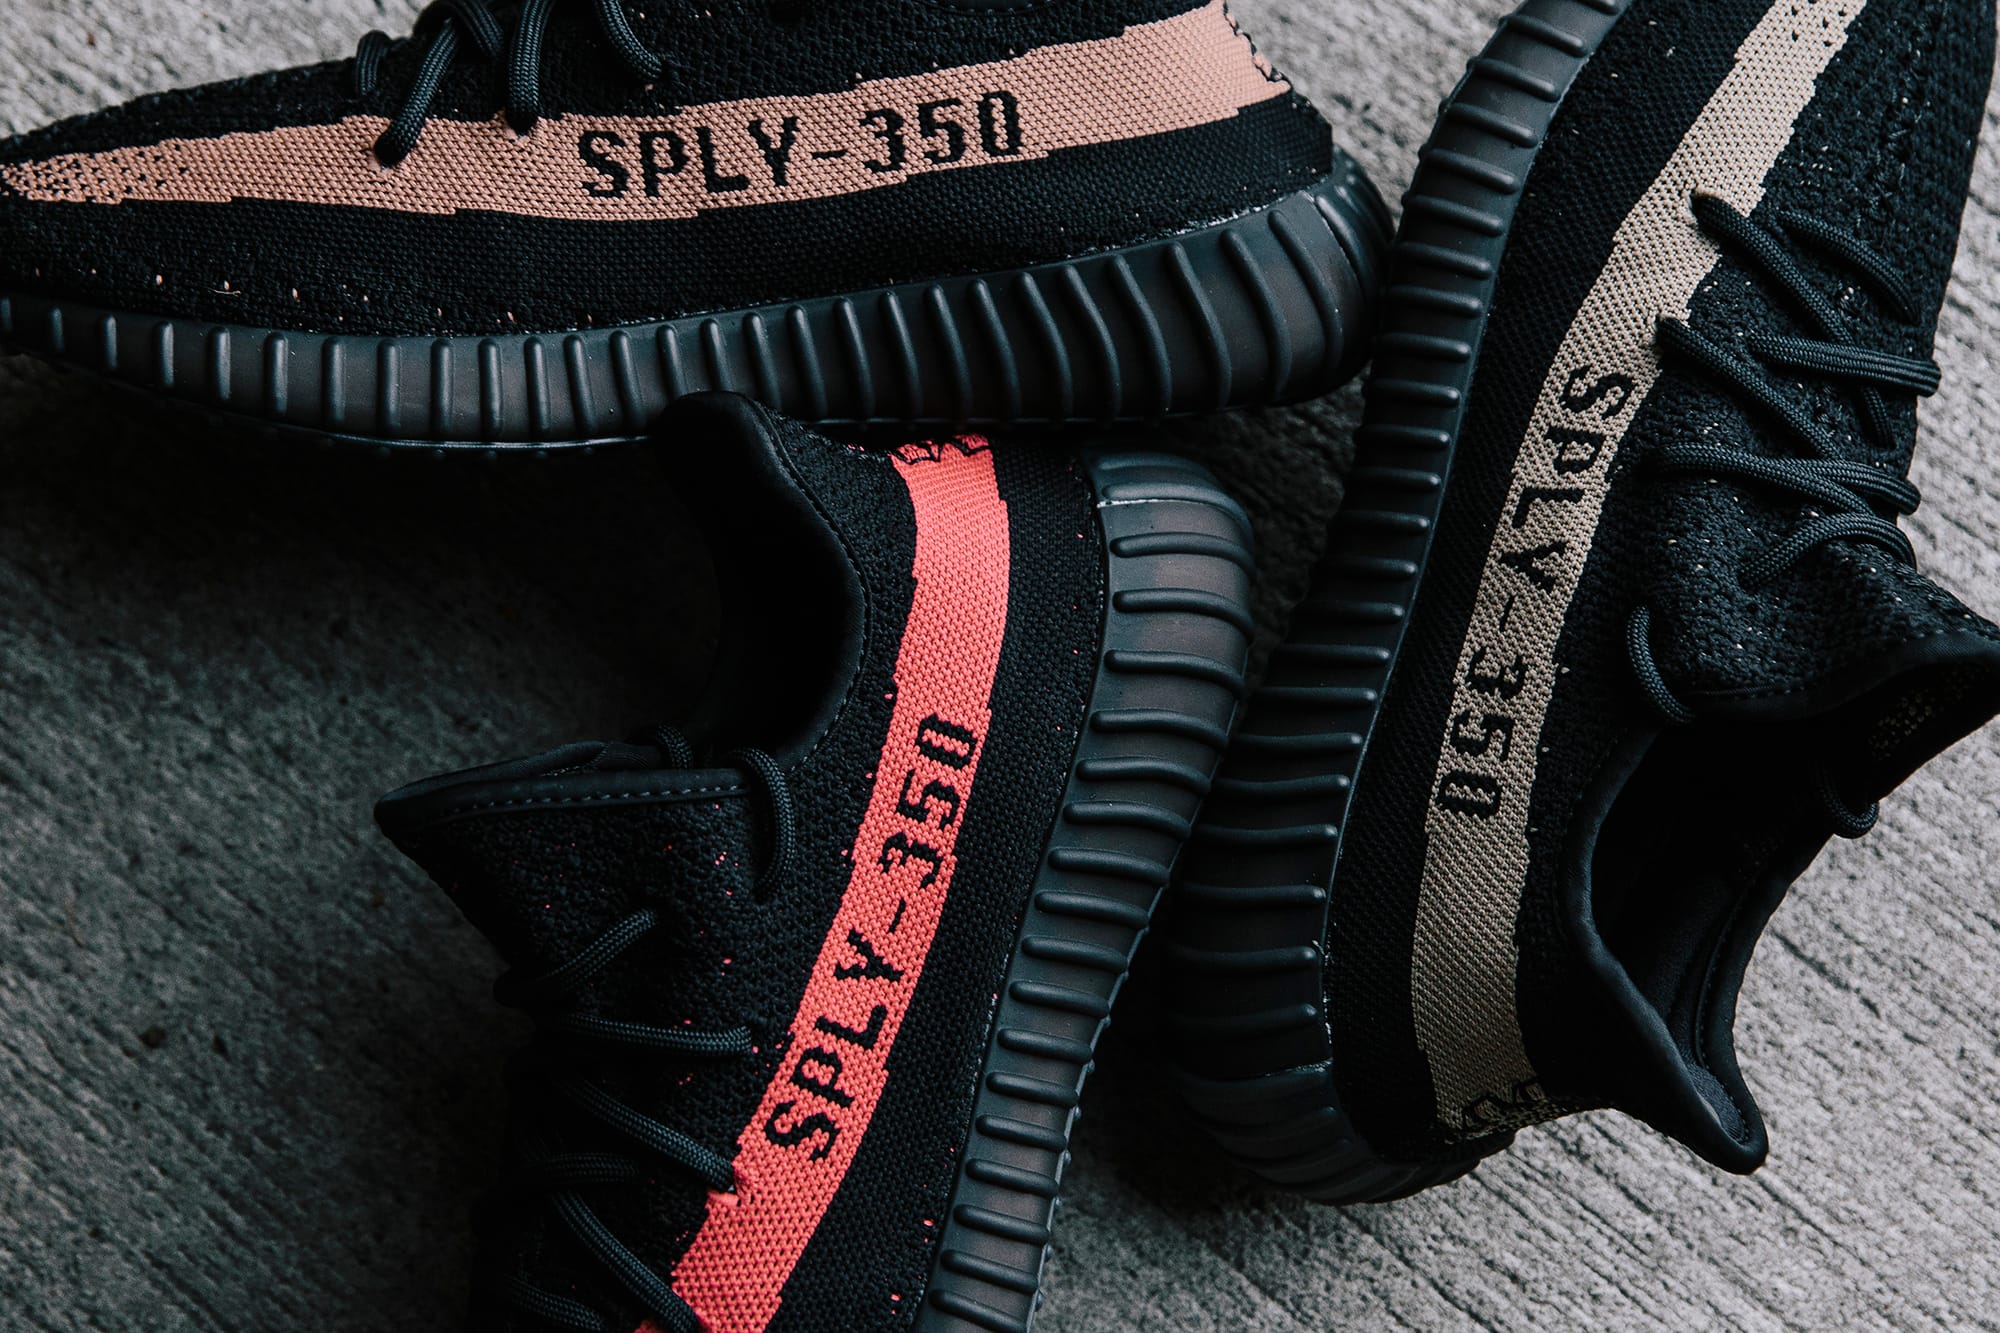 yeezy boost 350 v2 colorways list